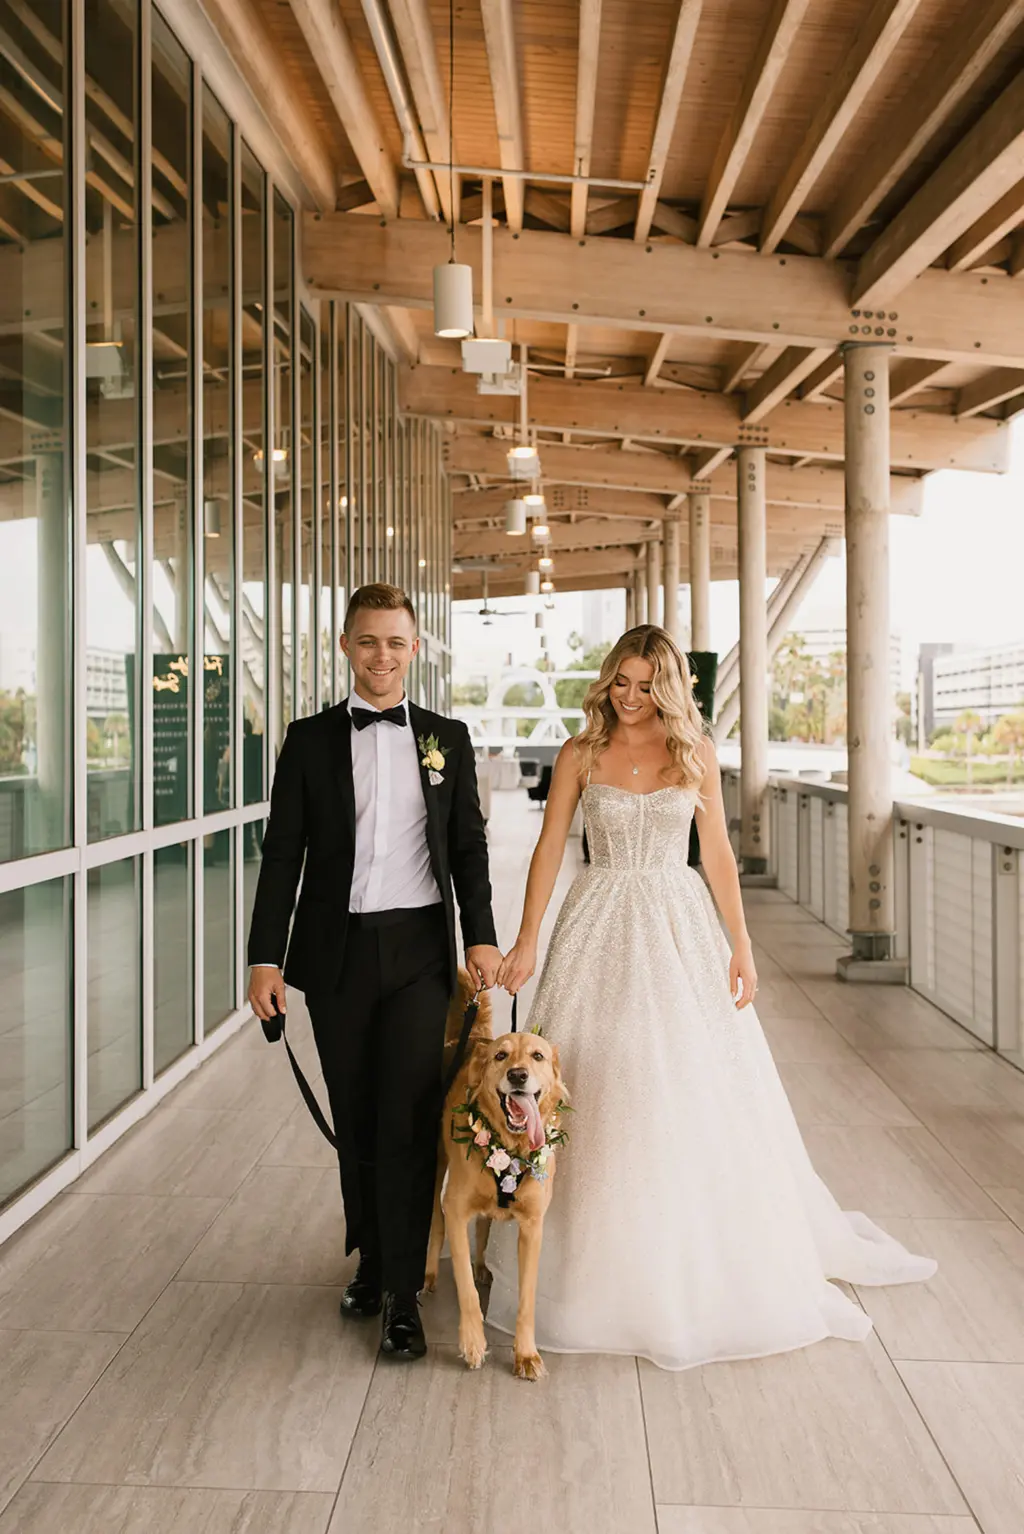 Bride and Groom with Dog on Wedding Day | Tampa Bay FairyTail Pet Care